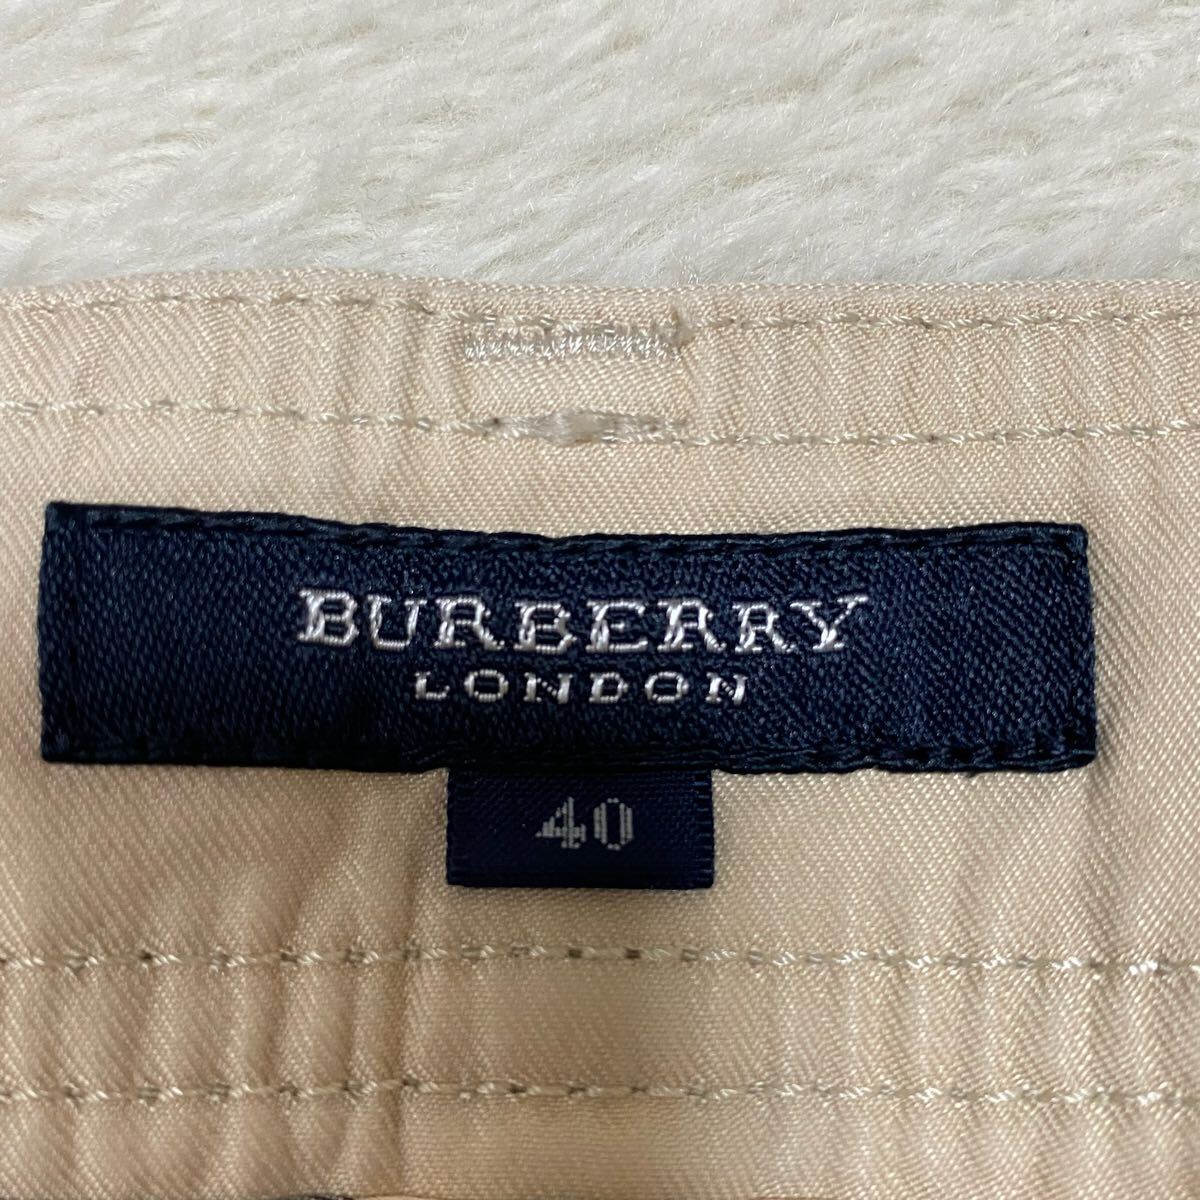 burberry london Burberry London flair cargo pants bottoms y2k made in Japan 40 cotton nylon domestic regular goods 